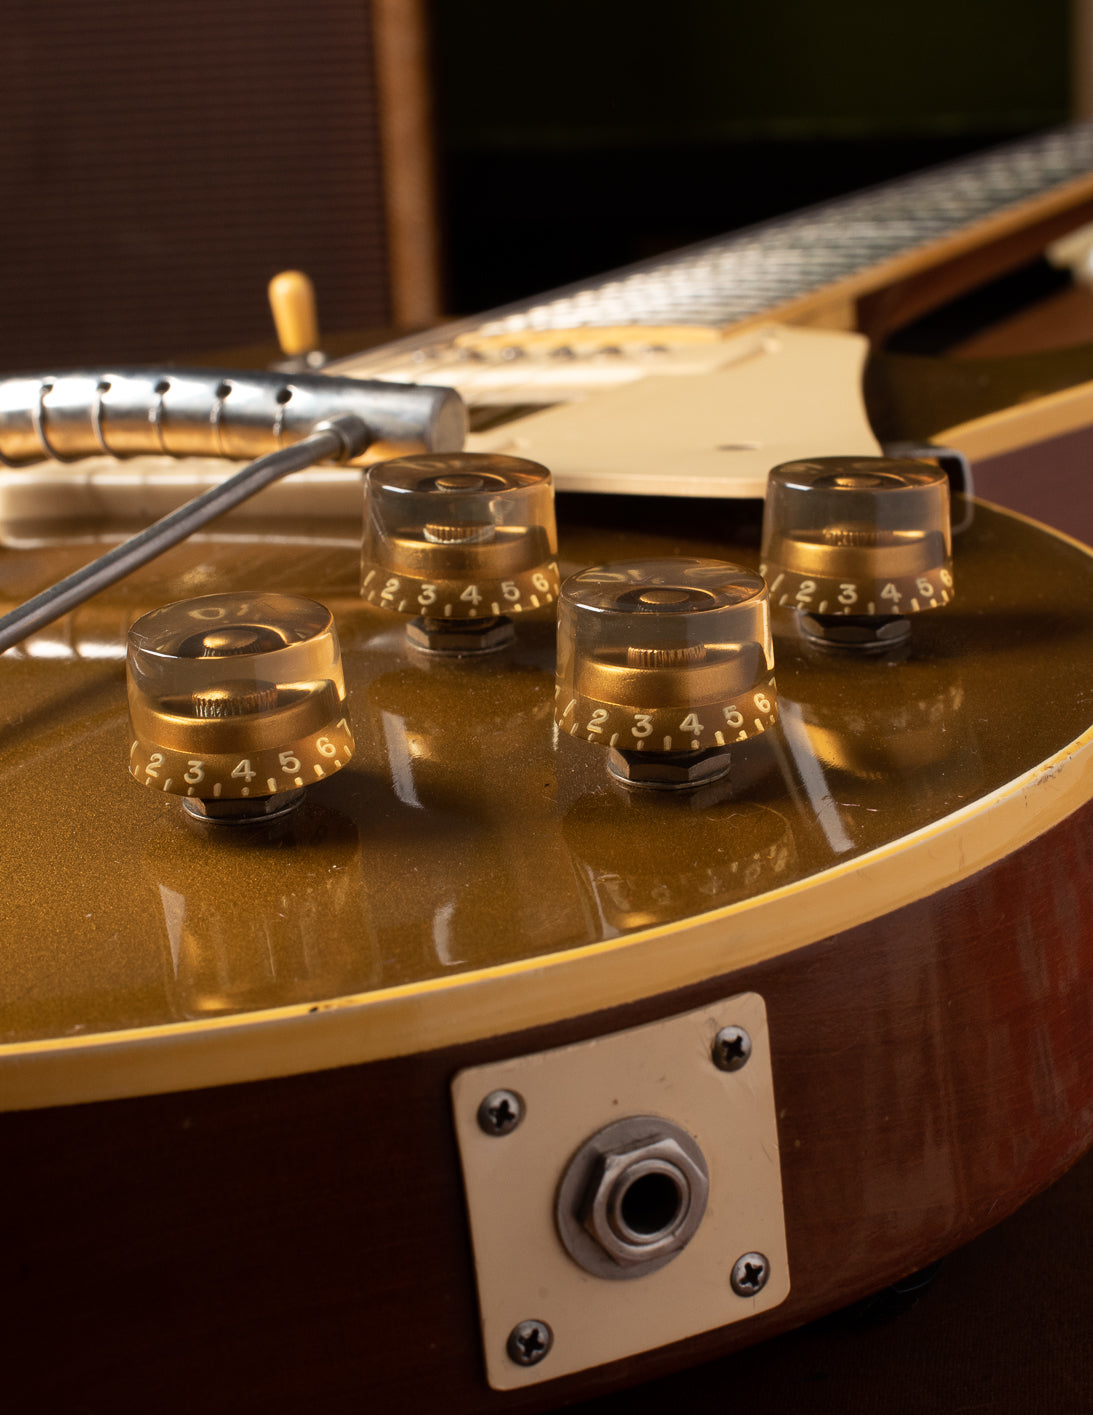 Tall speed knobs on original 1952 Gibson Les Paul goldtop